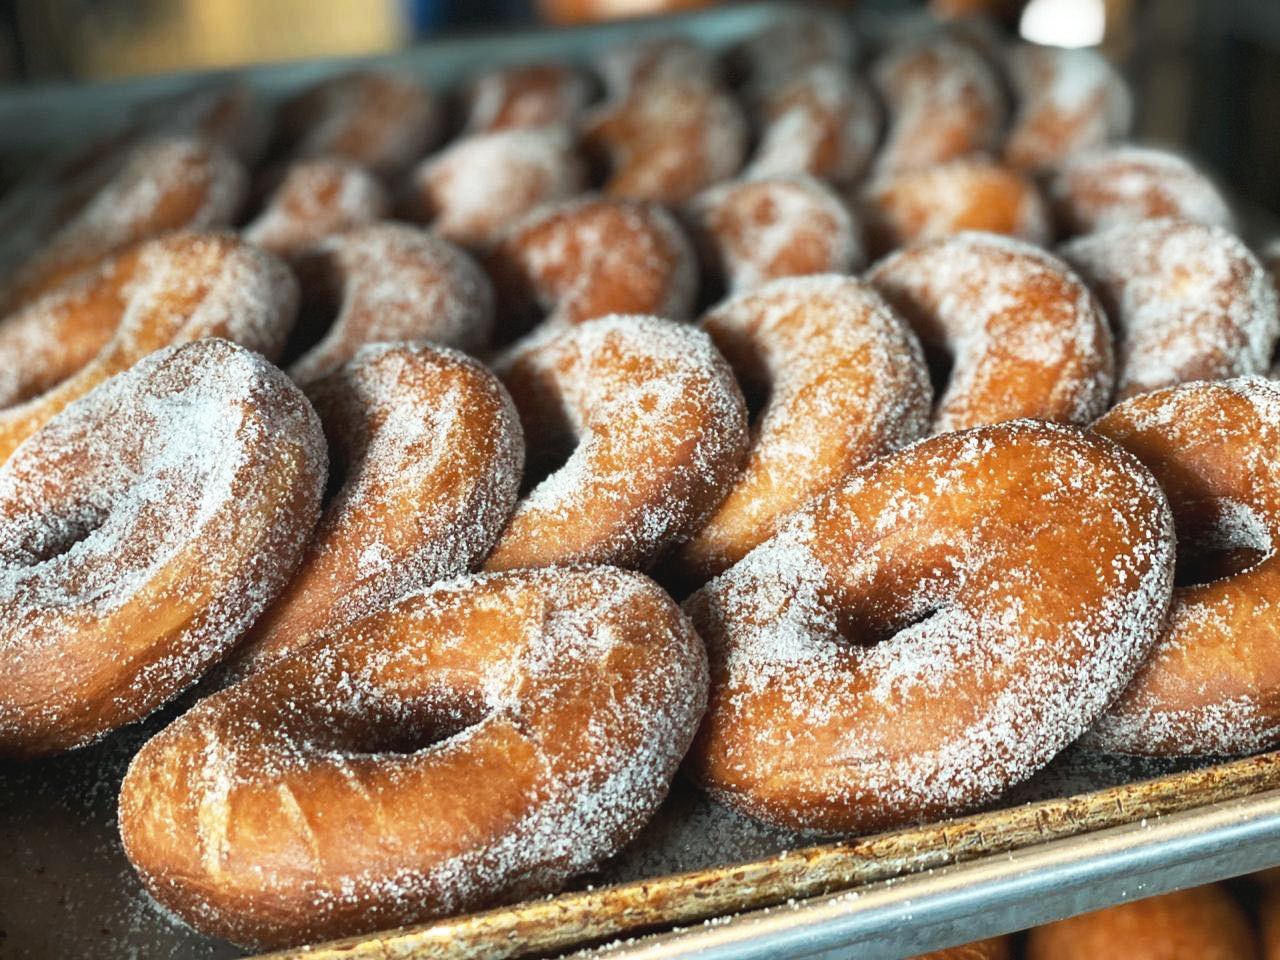 Tray of Old Fashioned Donuts topped with Sugar dessert or pastry